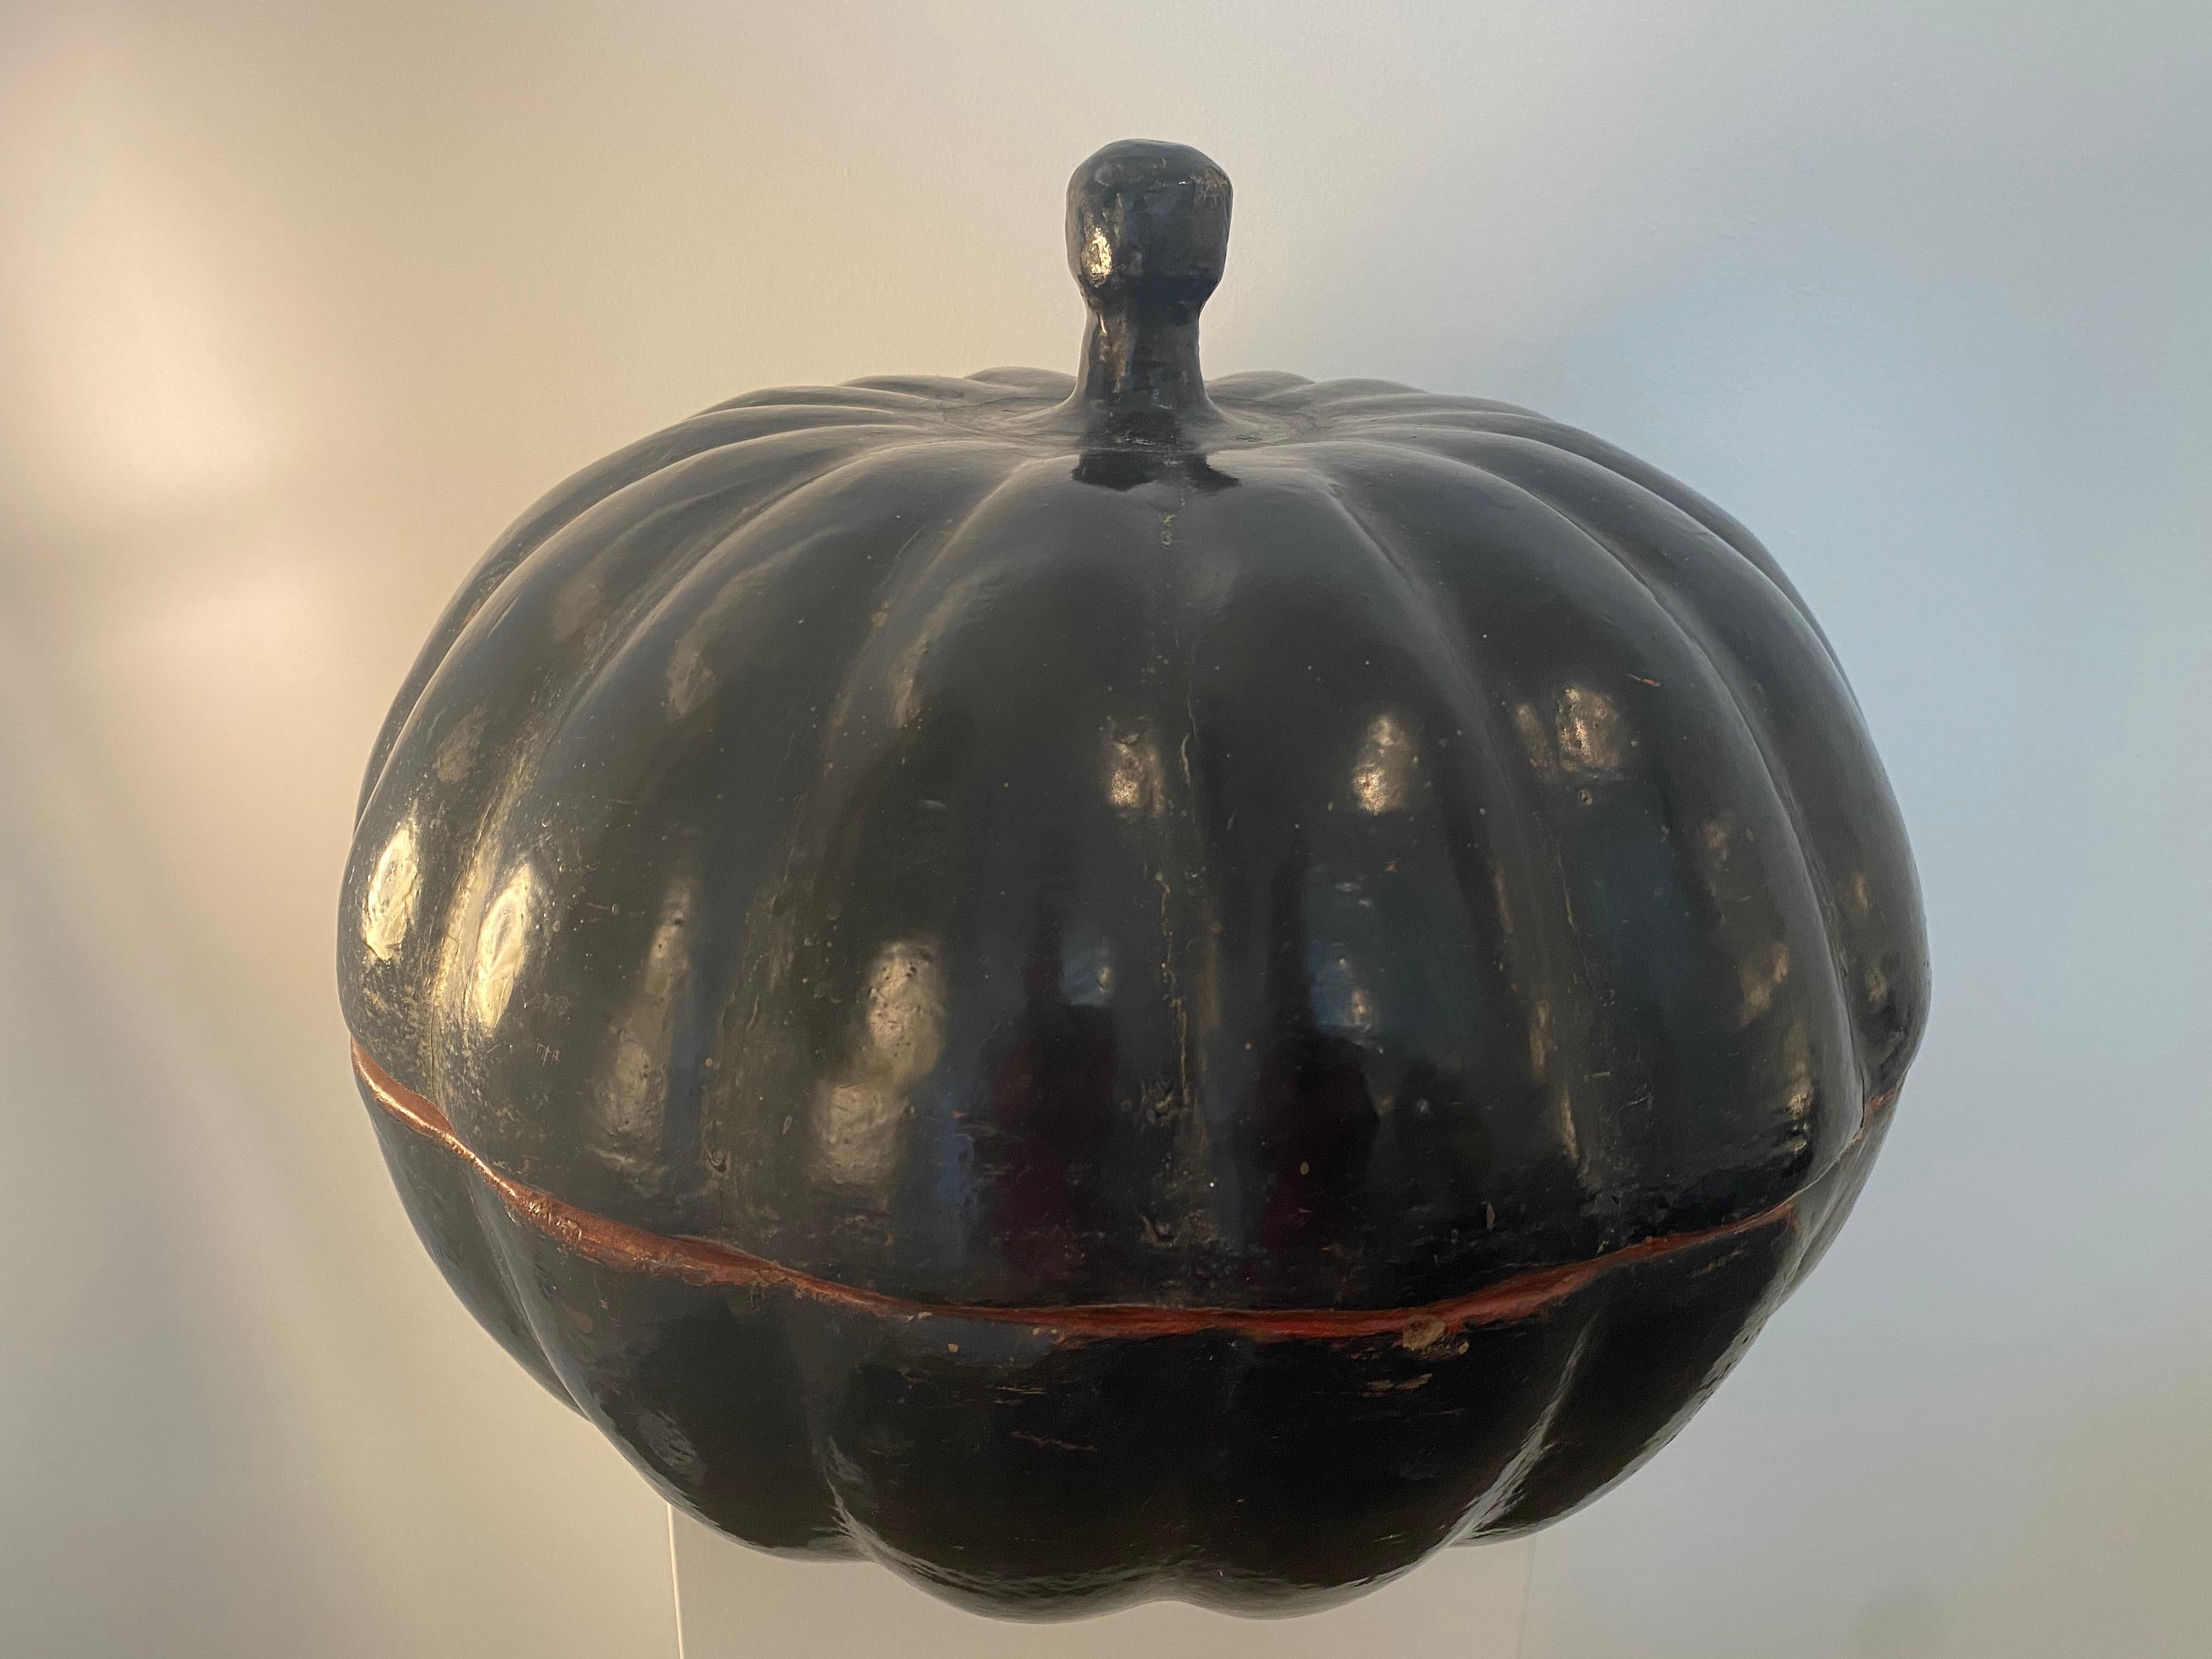 Large Pumpkin, a Burmese food box inBlack Lacquer,
great good old patina, warm finish and shine of the Lacquer,
very elegant and decorative object